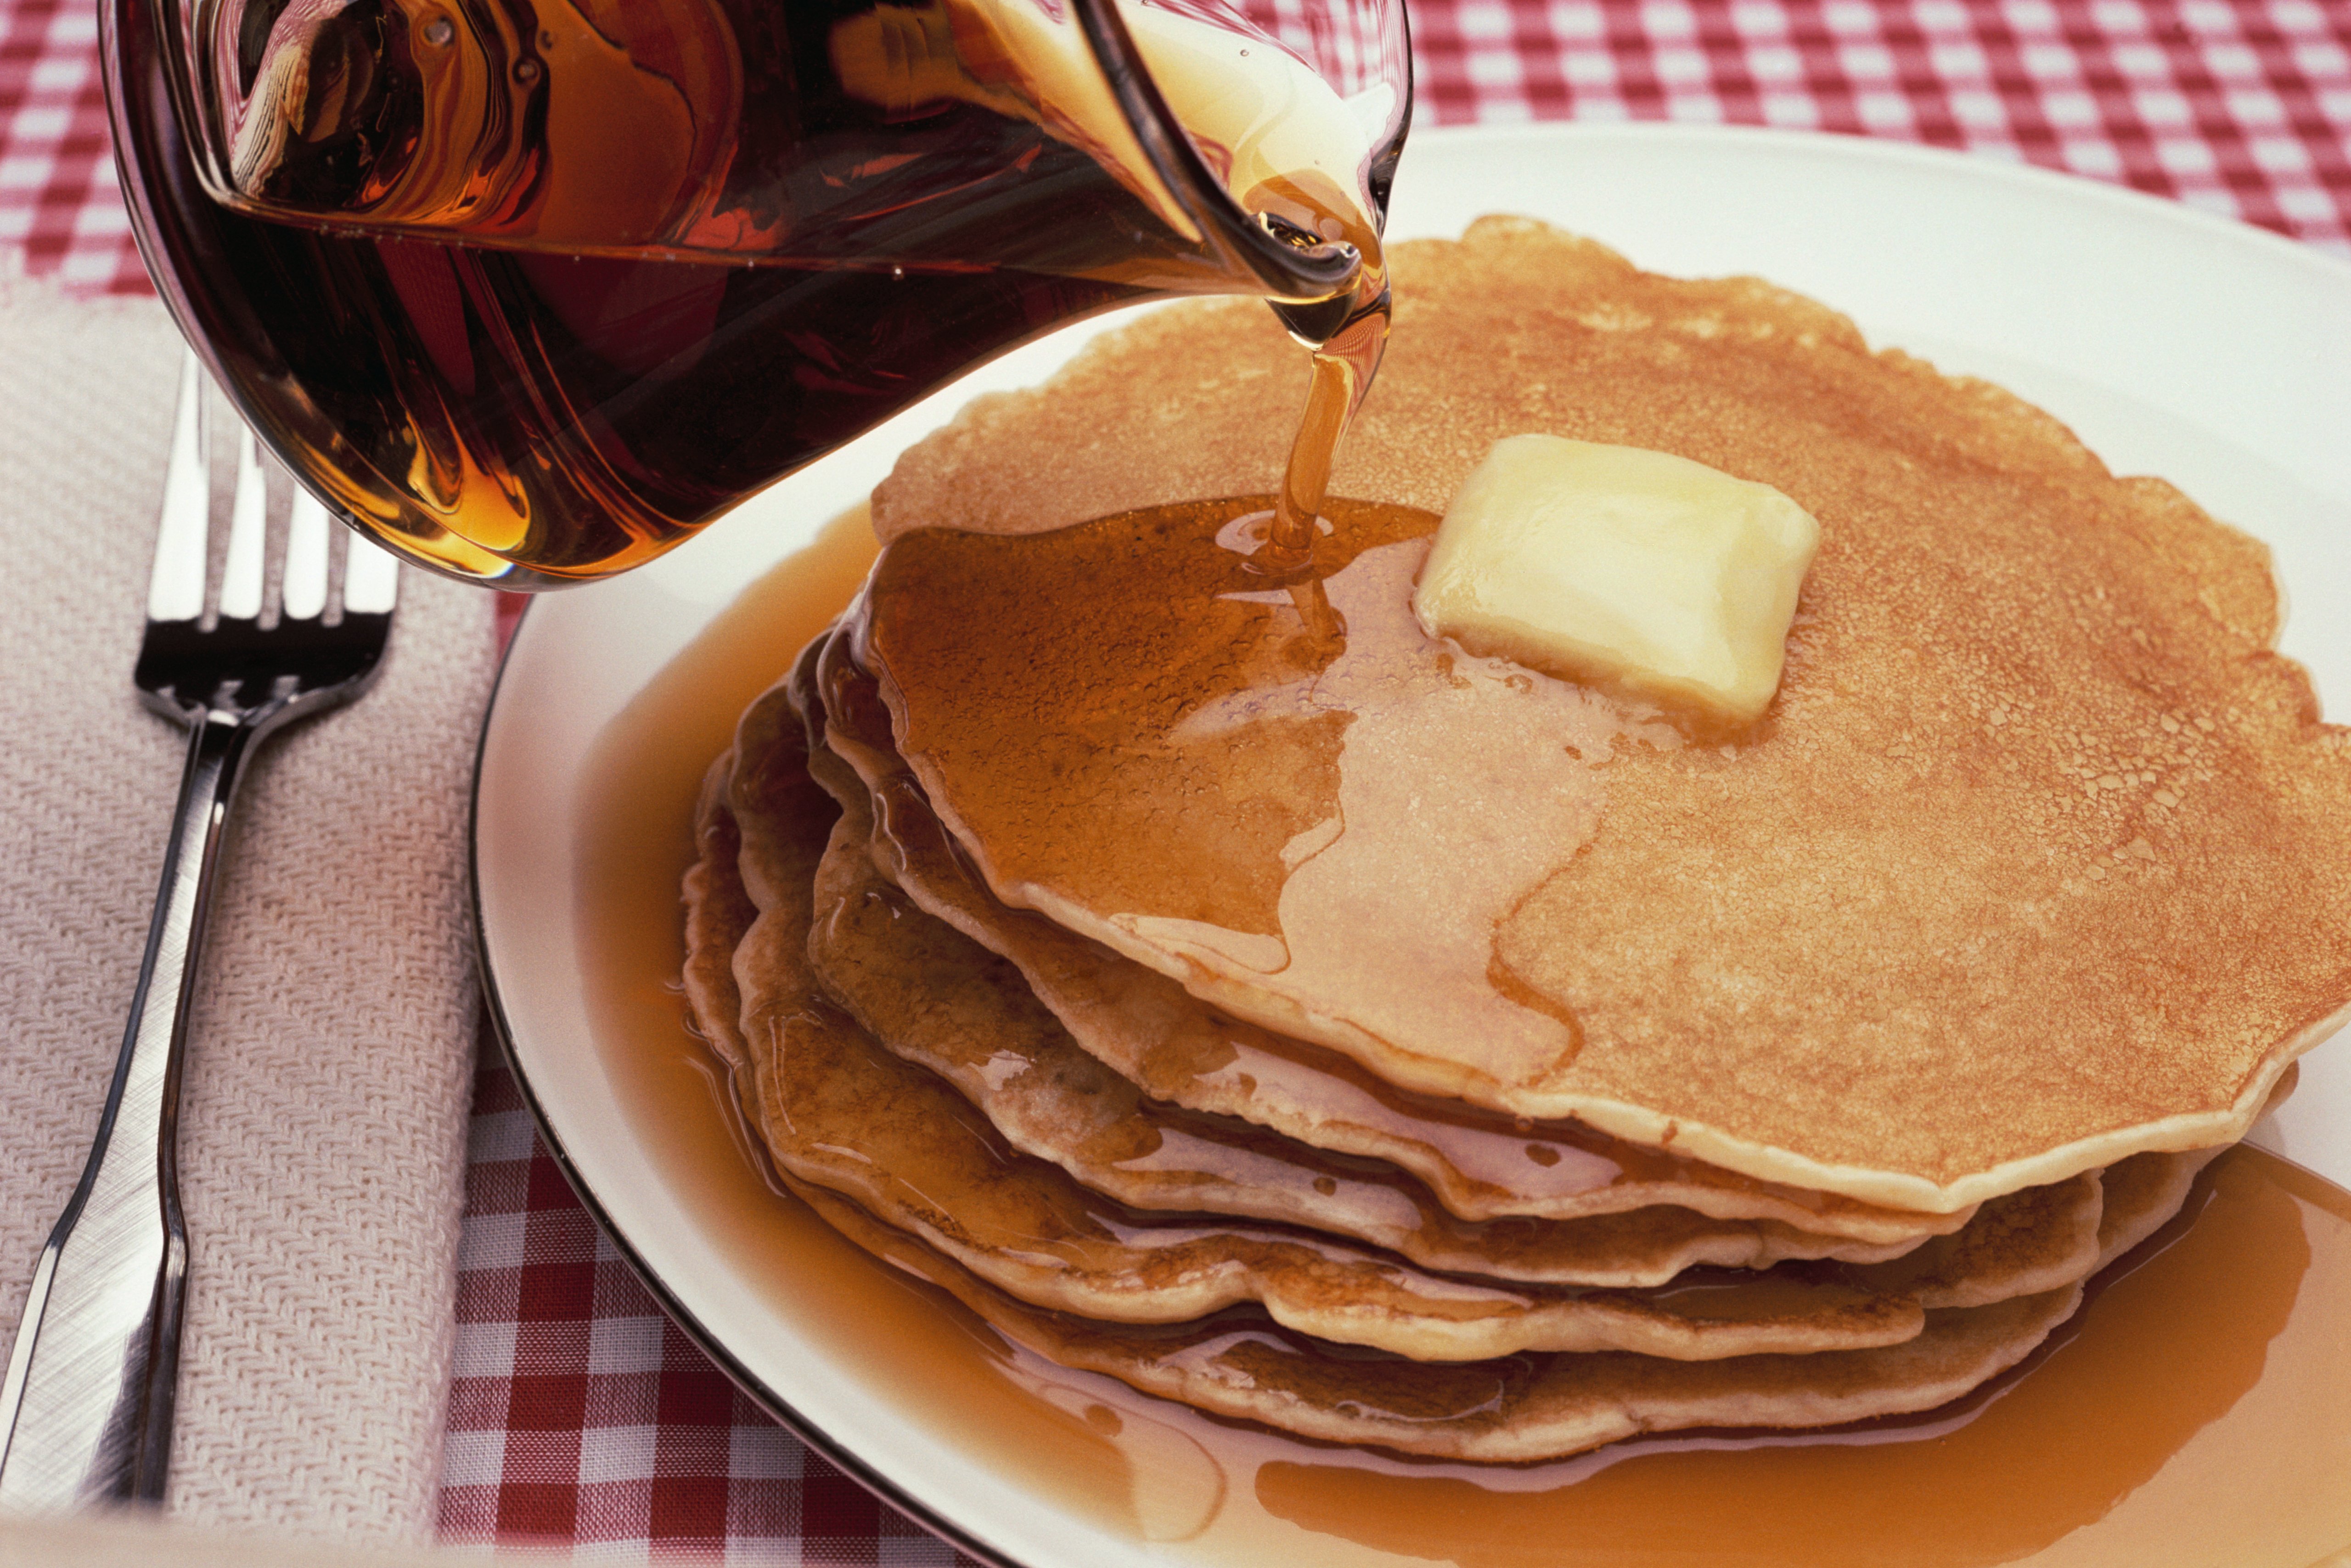 An image of maple syrup being poured on a plate of pancakes | Source: Getty Images